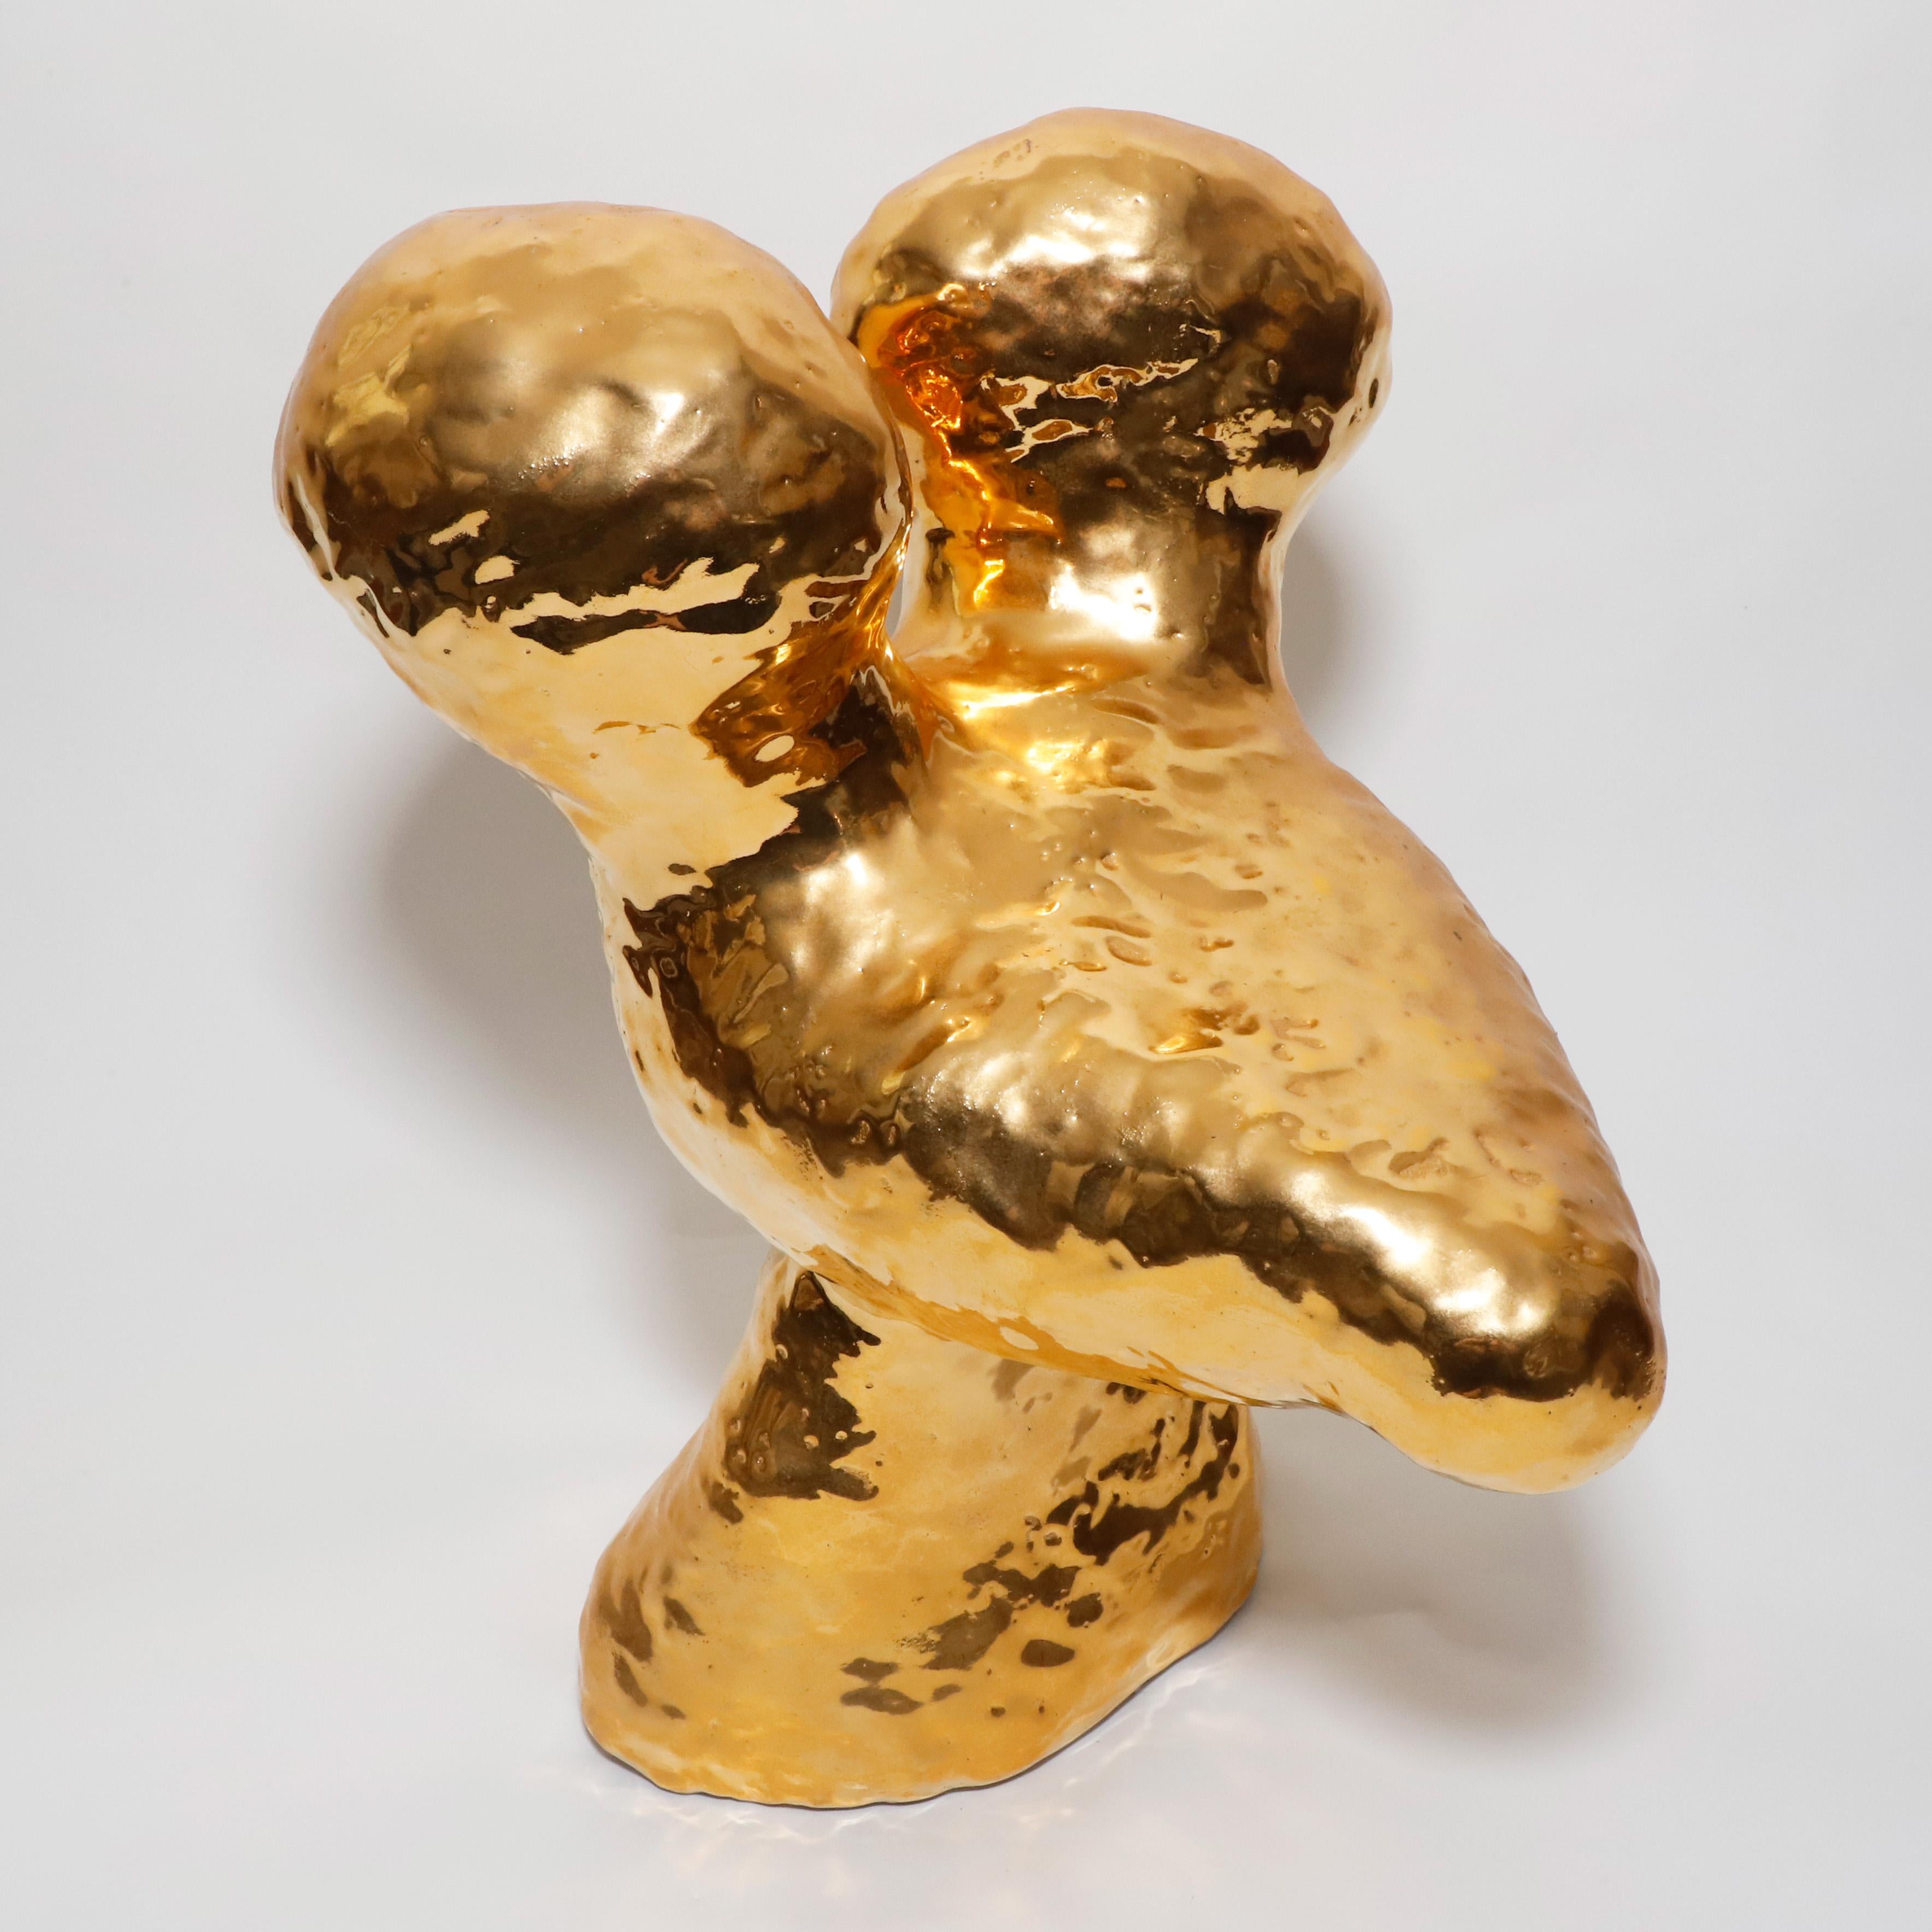 Unique abstract ceramic and 24k gold sculpture by the Finish artist Jasmin Anoschkin. Titled 